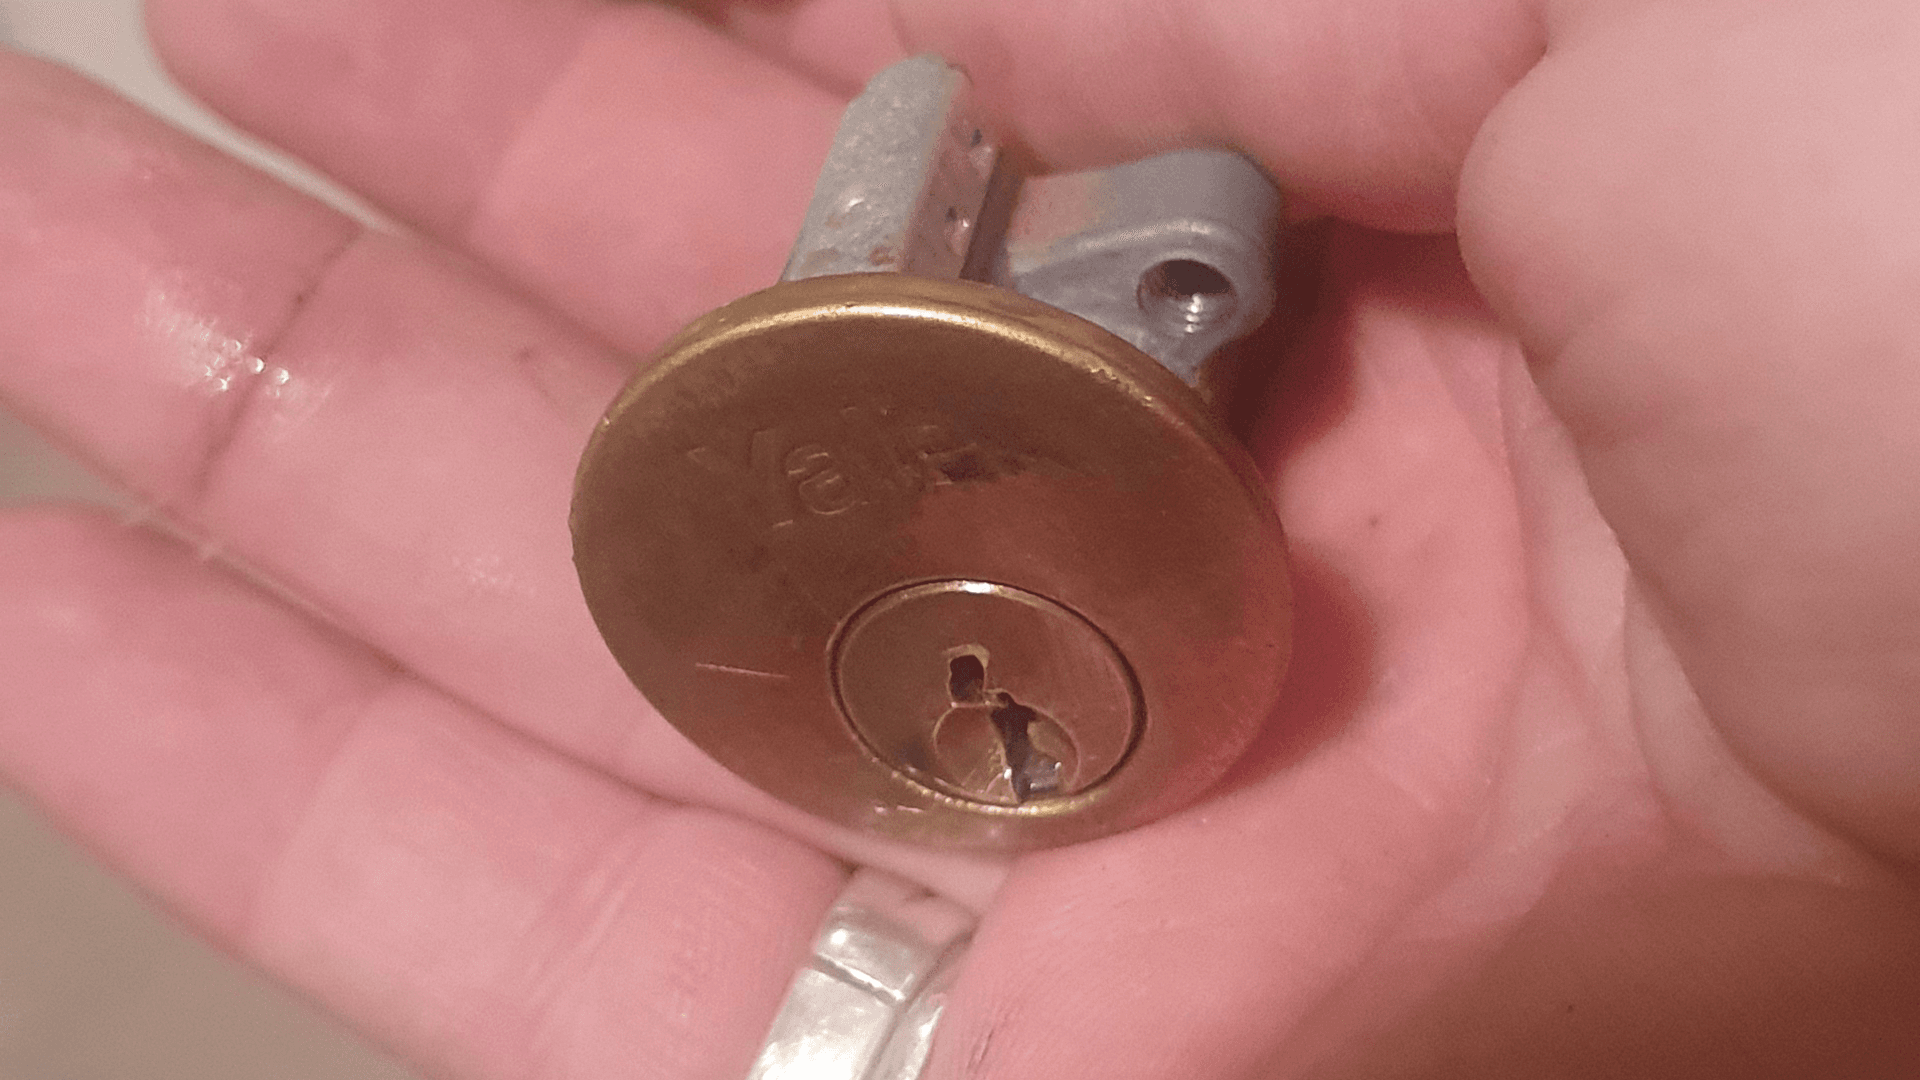 A snapped key extraction with the cylinder shown